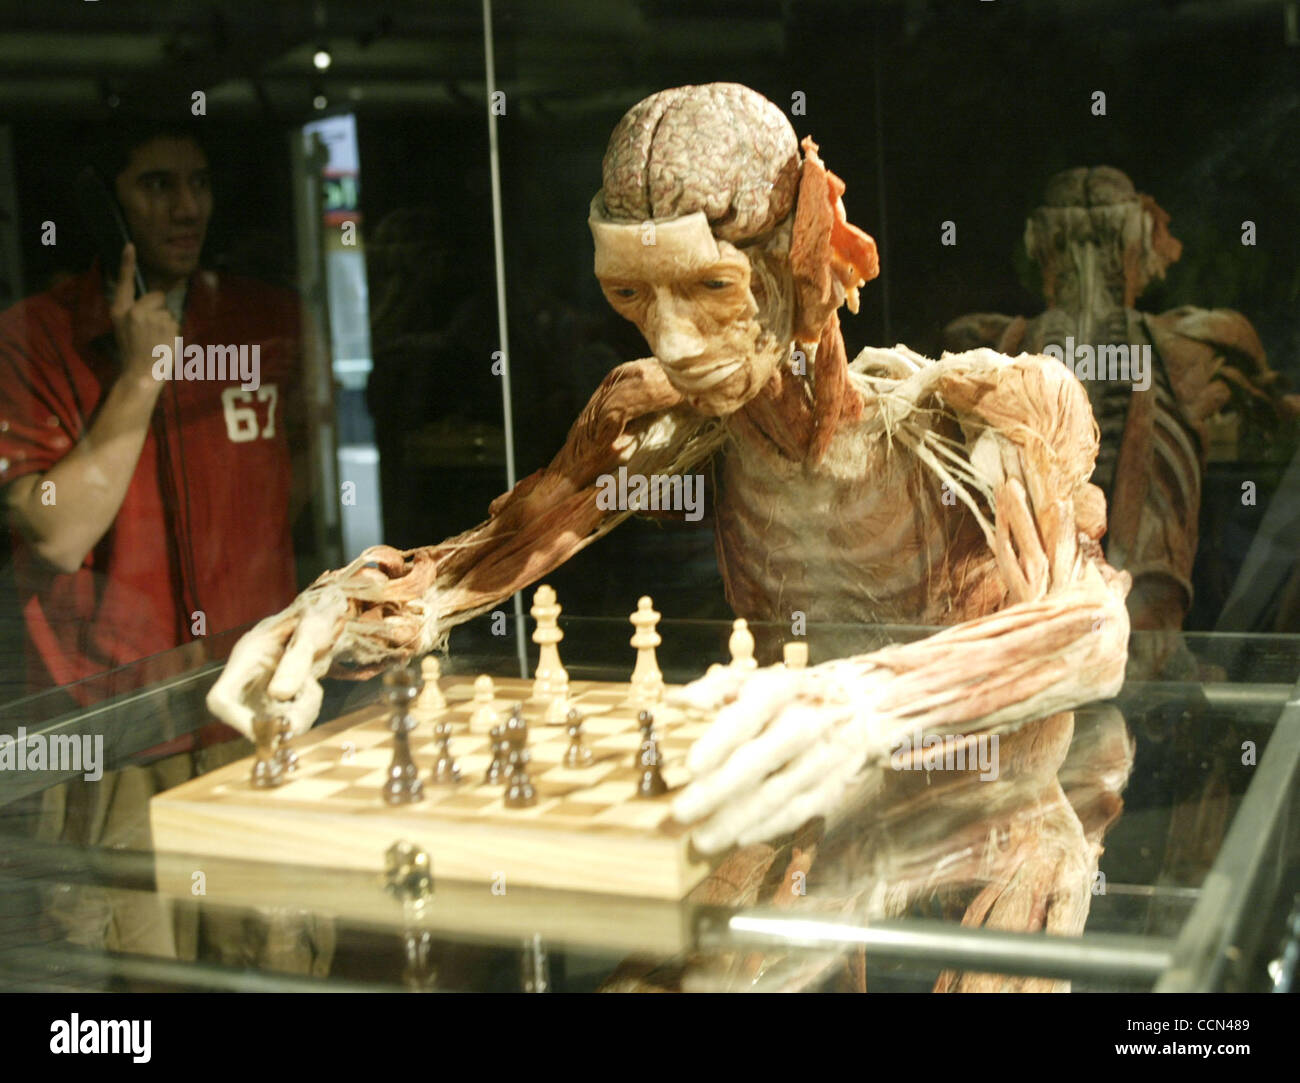 Aug 10, 2004; Los Angeles, CA, USA; Visitors view the BODY WORLDS exhibit  displayed at the California Science Center, the largest traveling exhibition  ever covering 20,000 square feet. Until recently the privilege